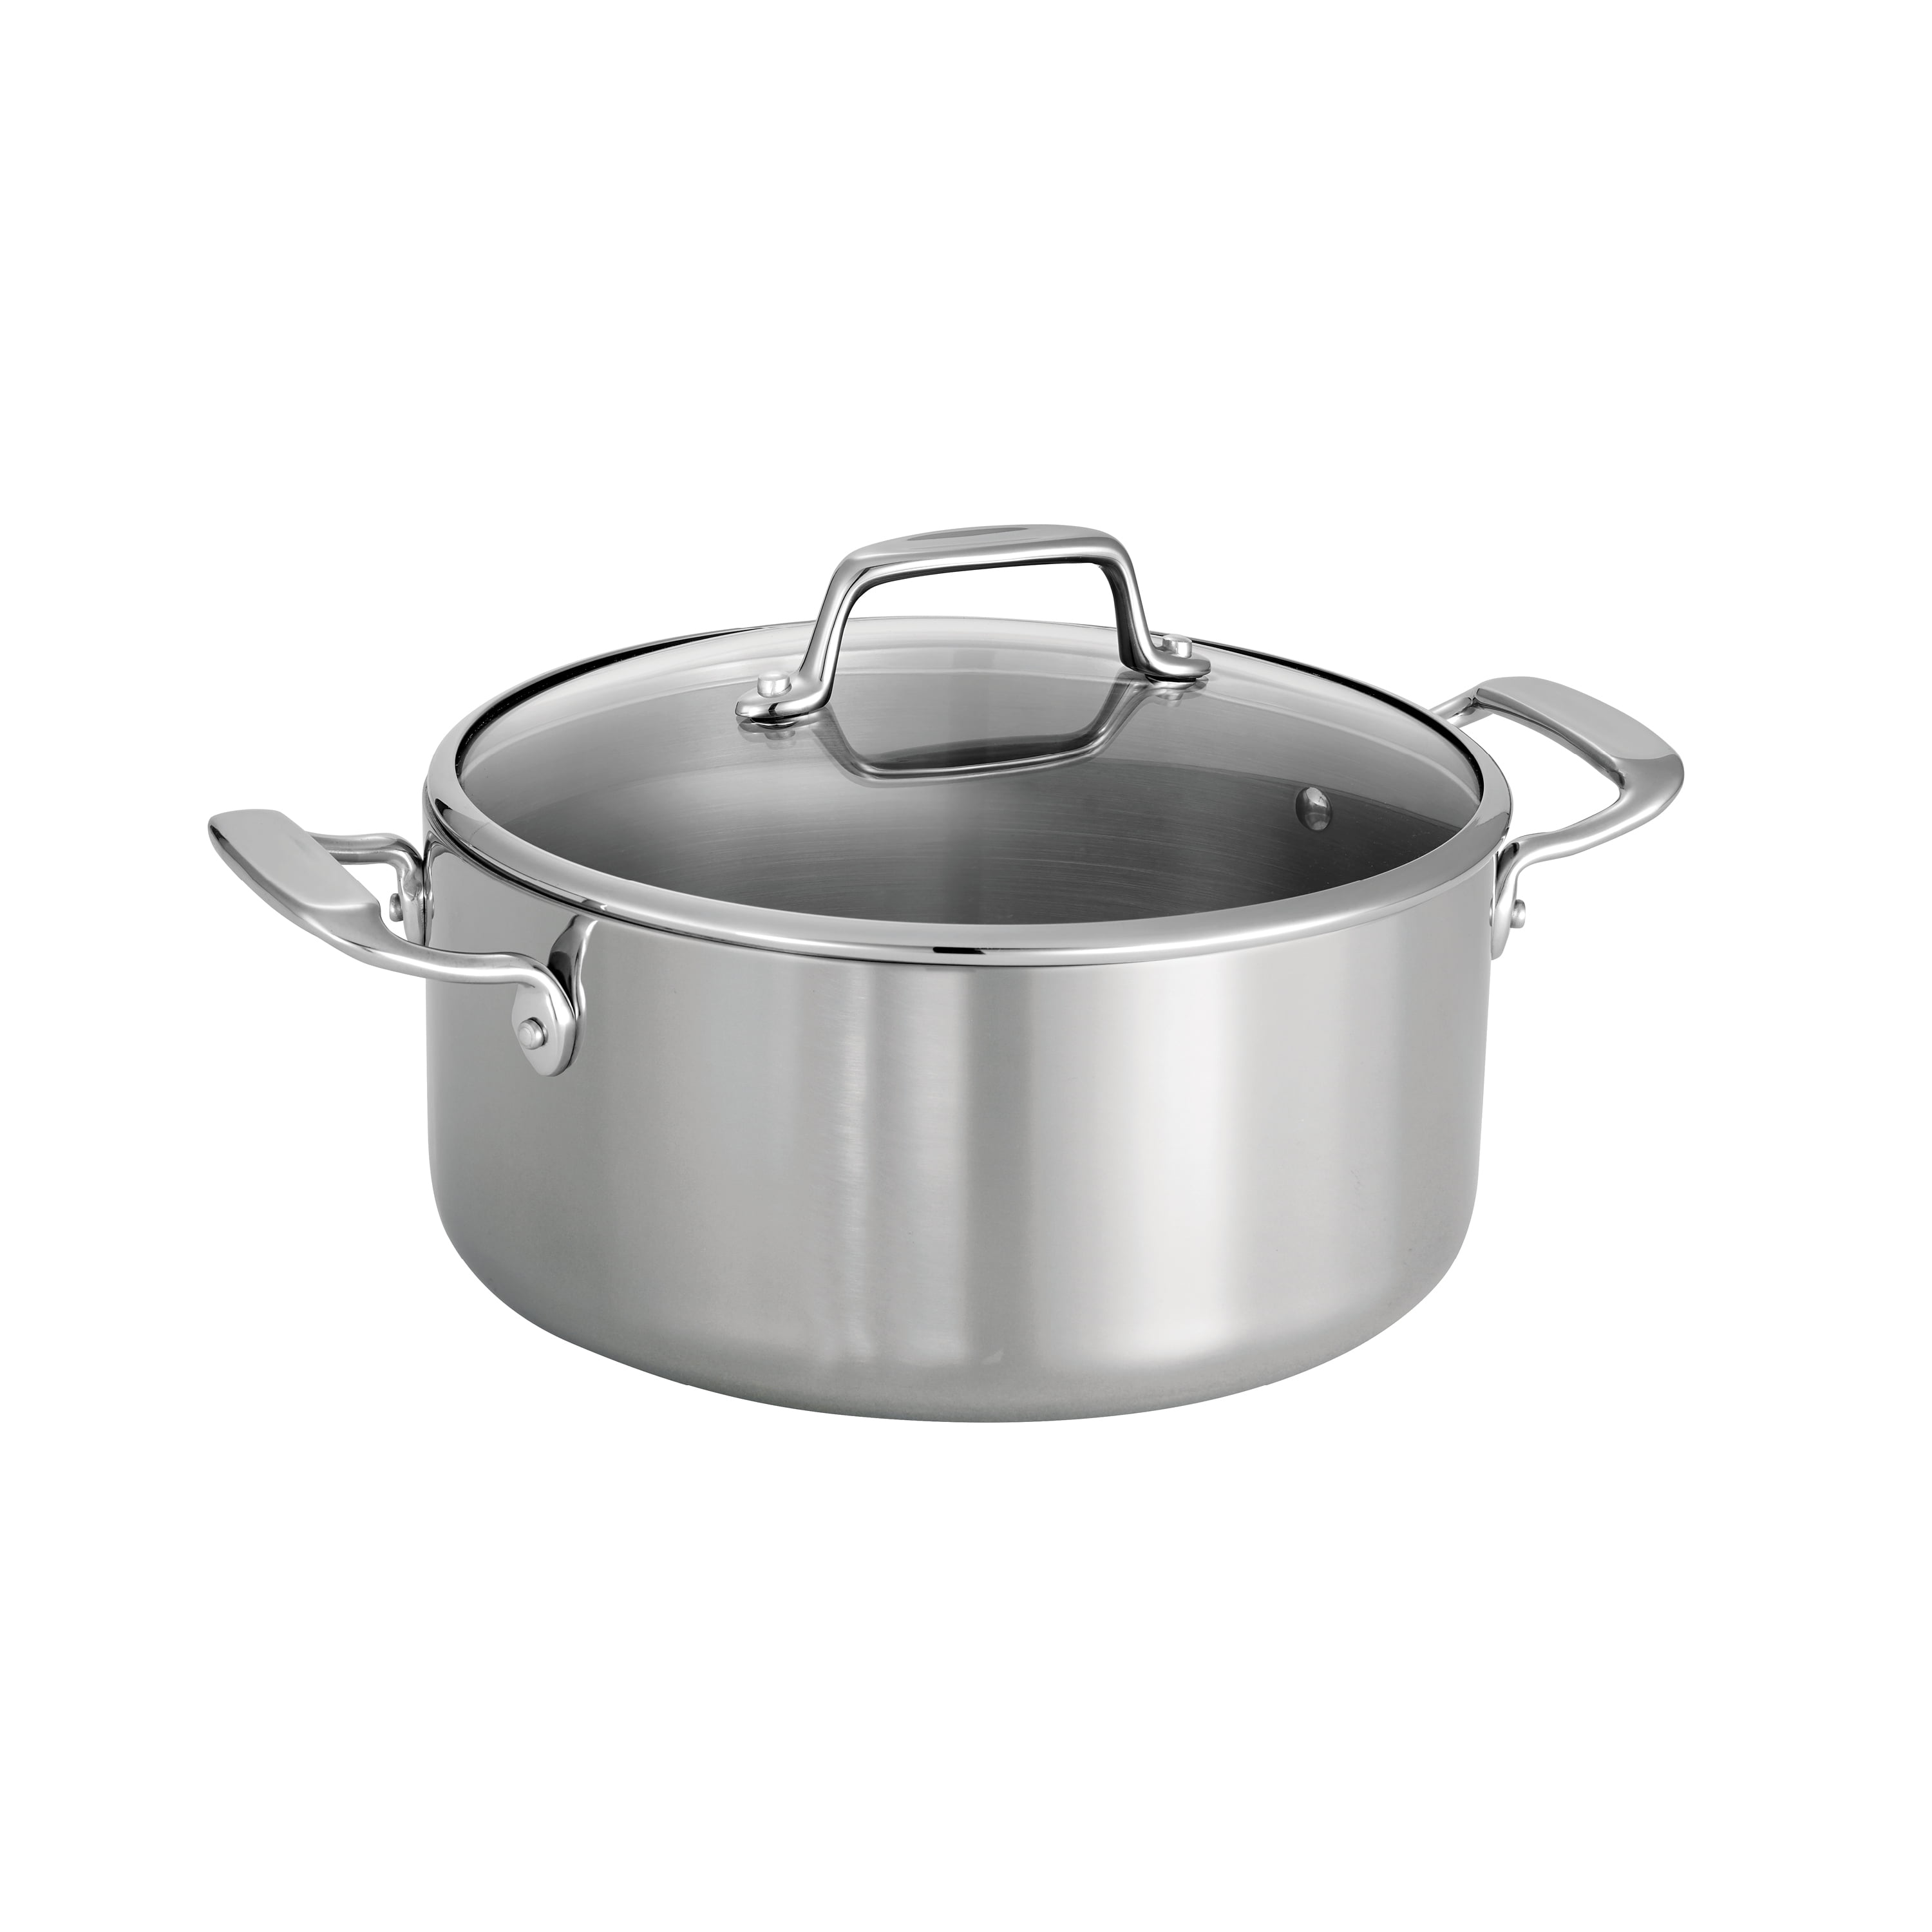 Le Chef 5-ply Stainless Steel Dutch Oven 5-qt Super Sale. 